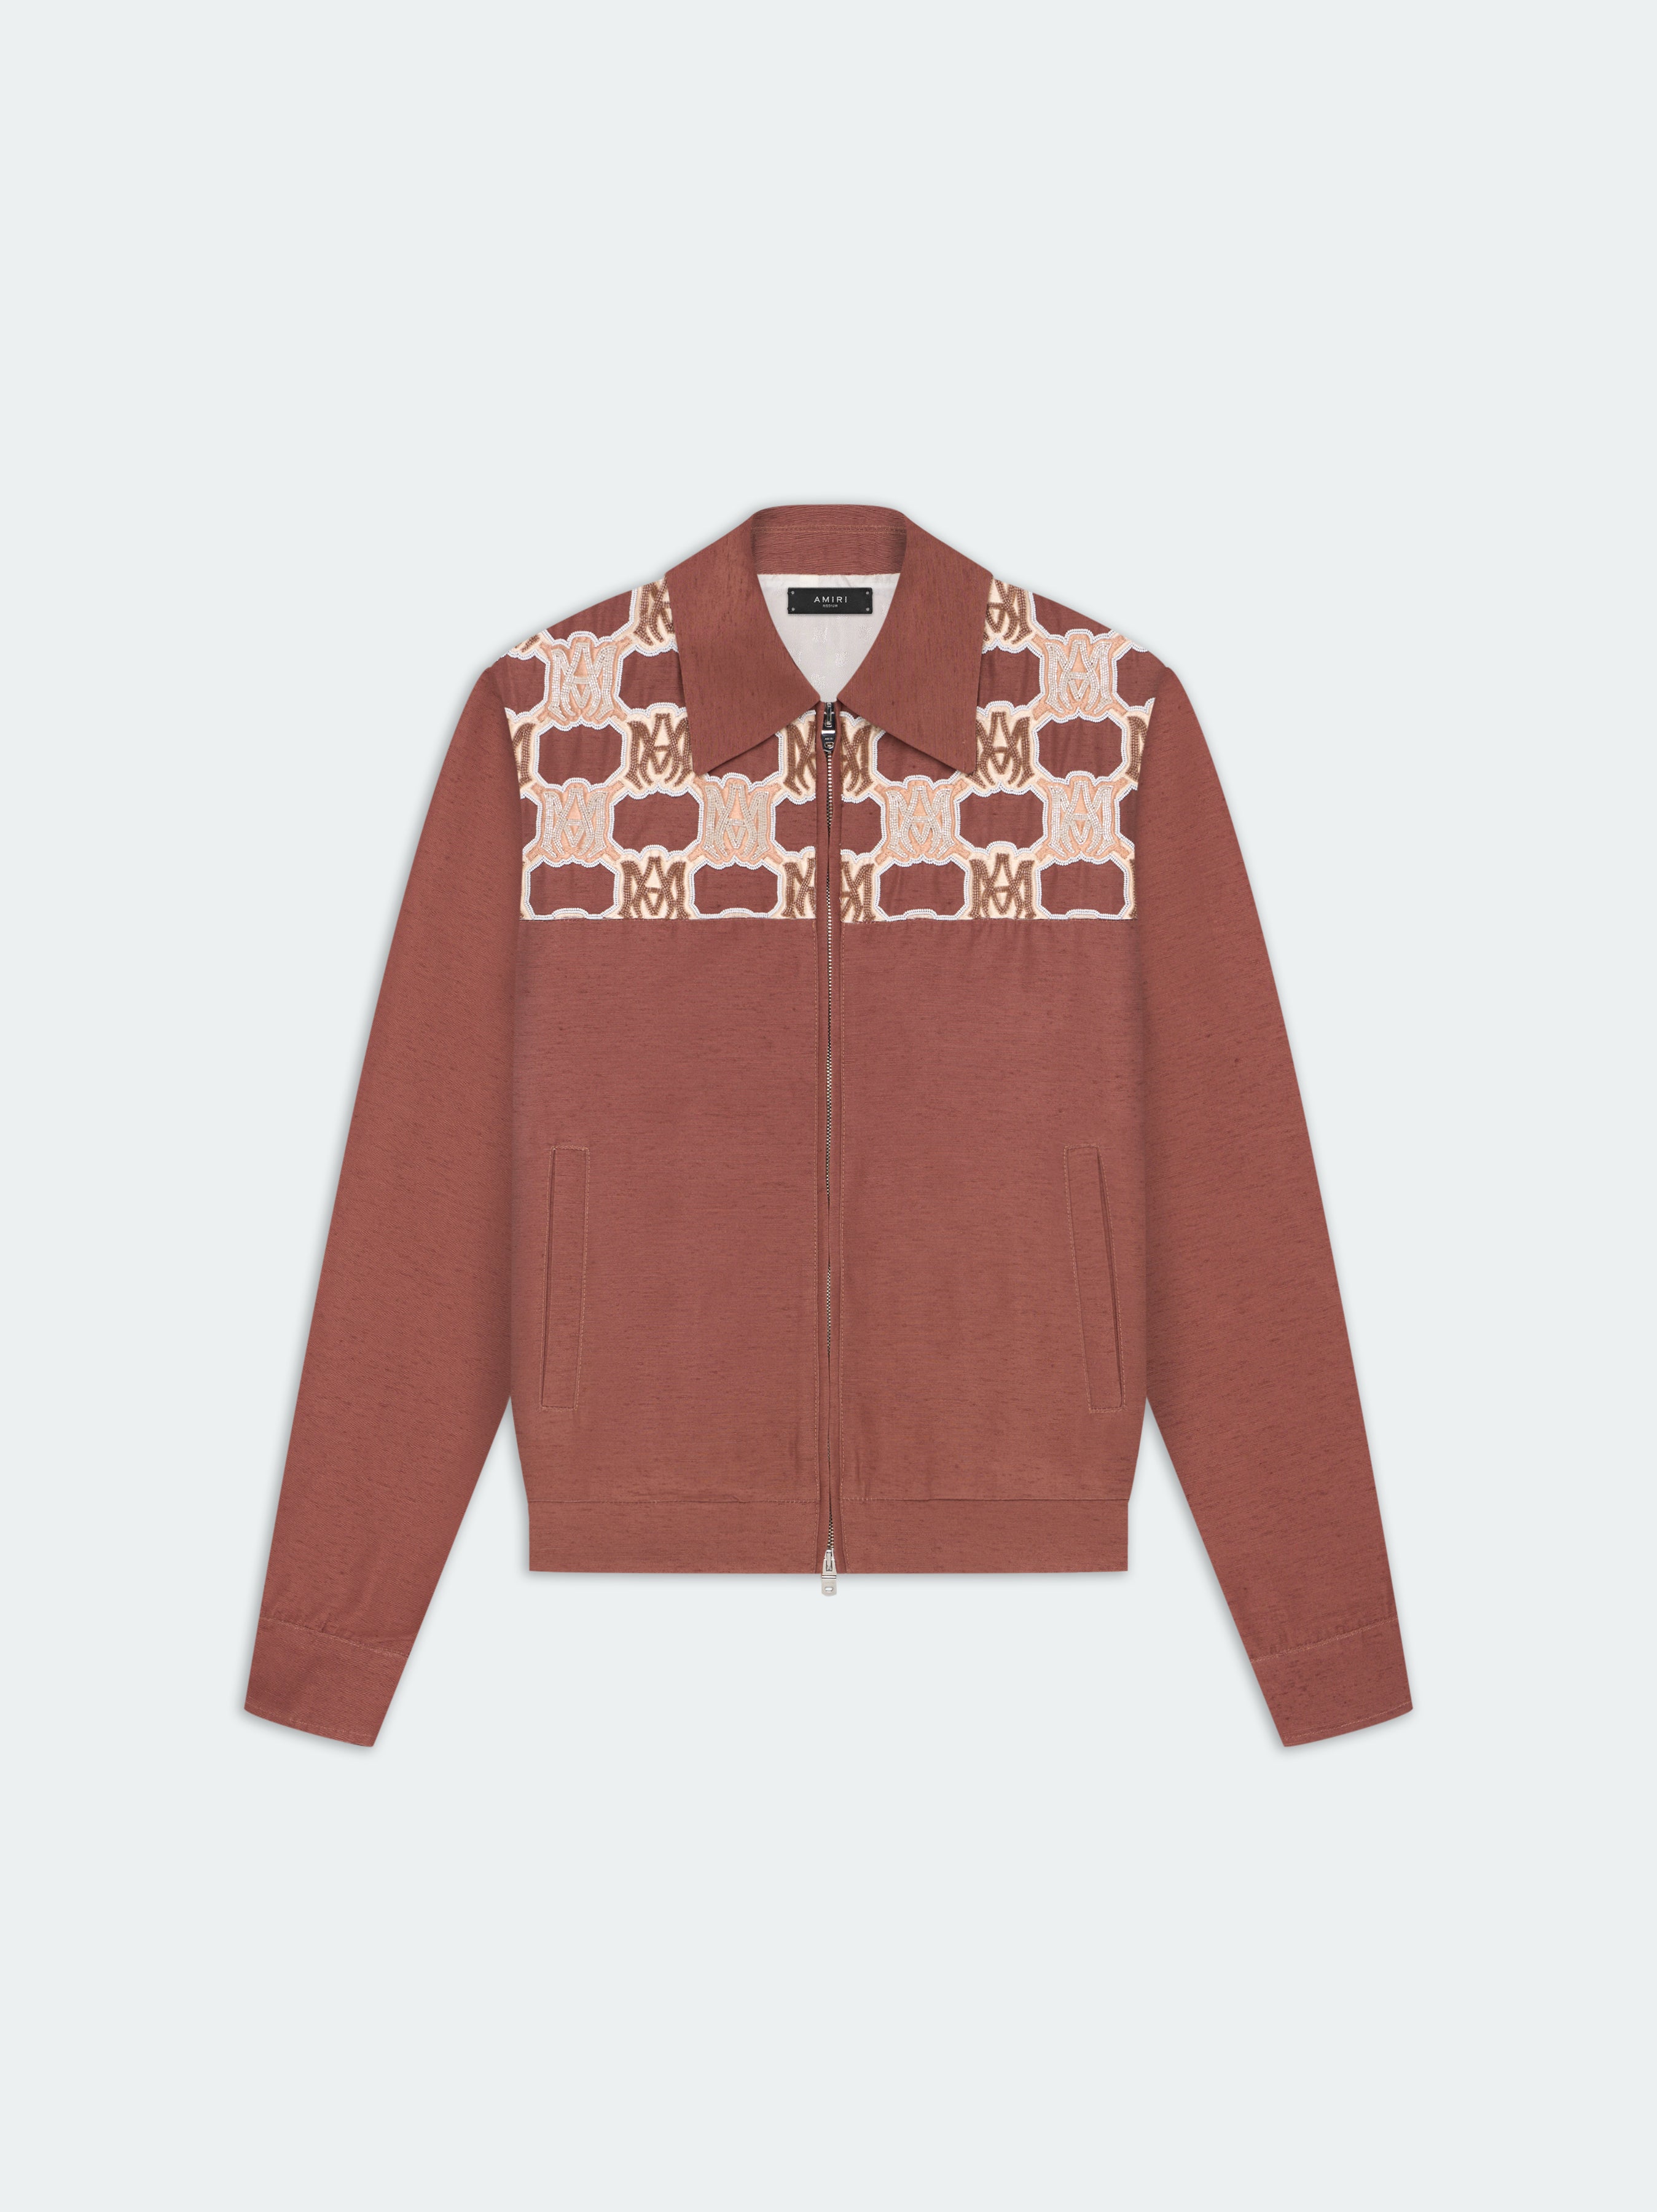 Product GLASS BEADED MA YOKE BLOUSON - Copper Brown featured image